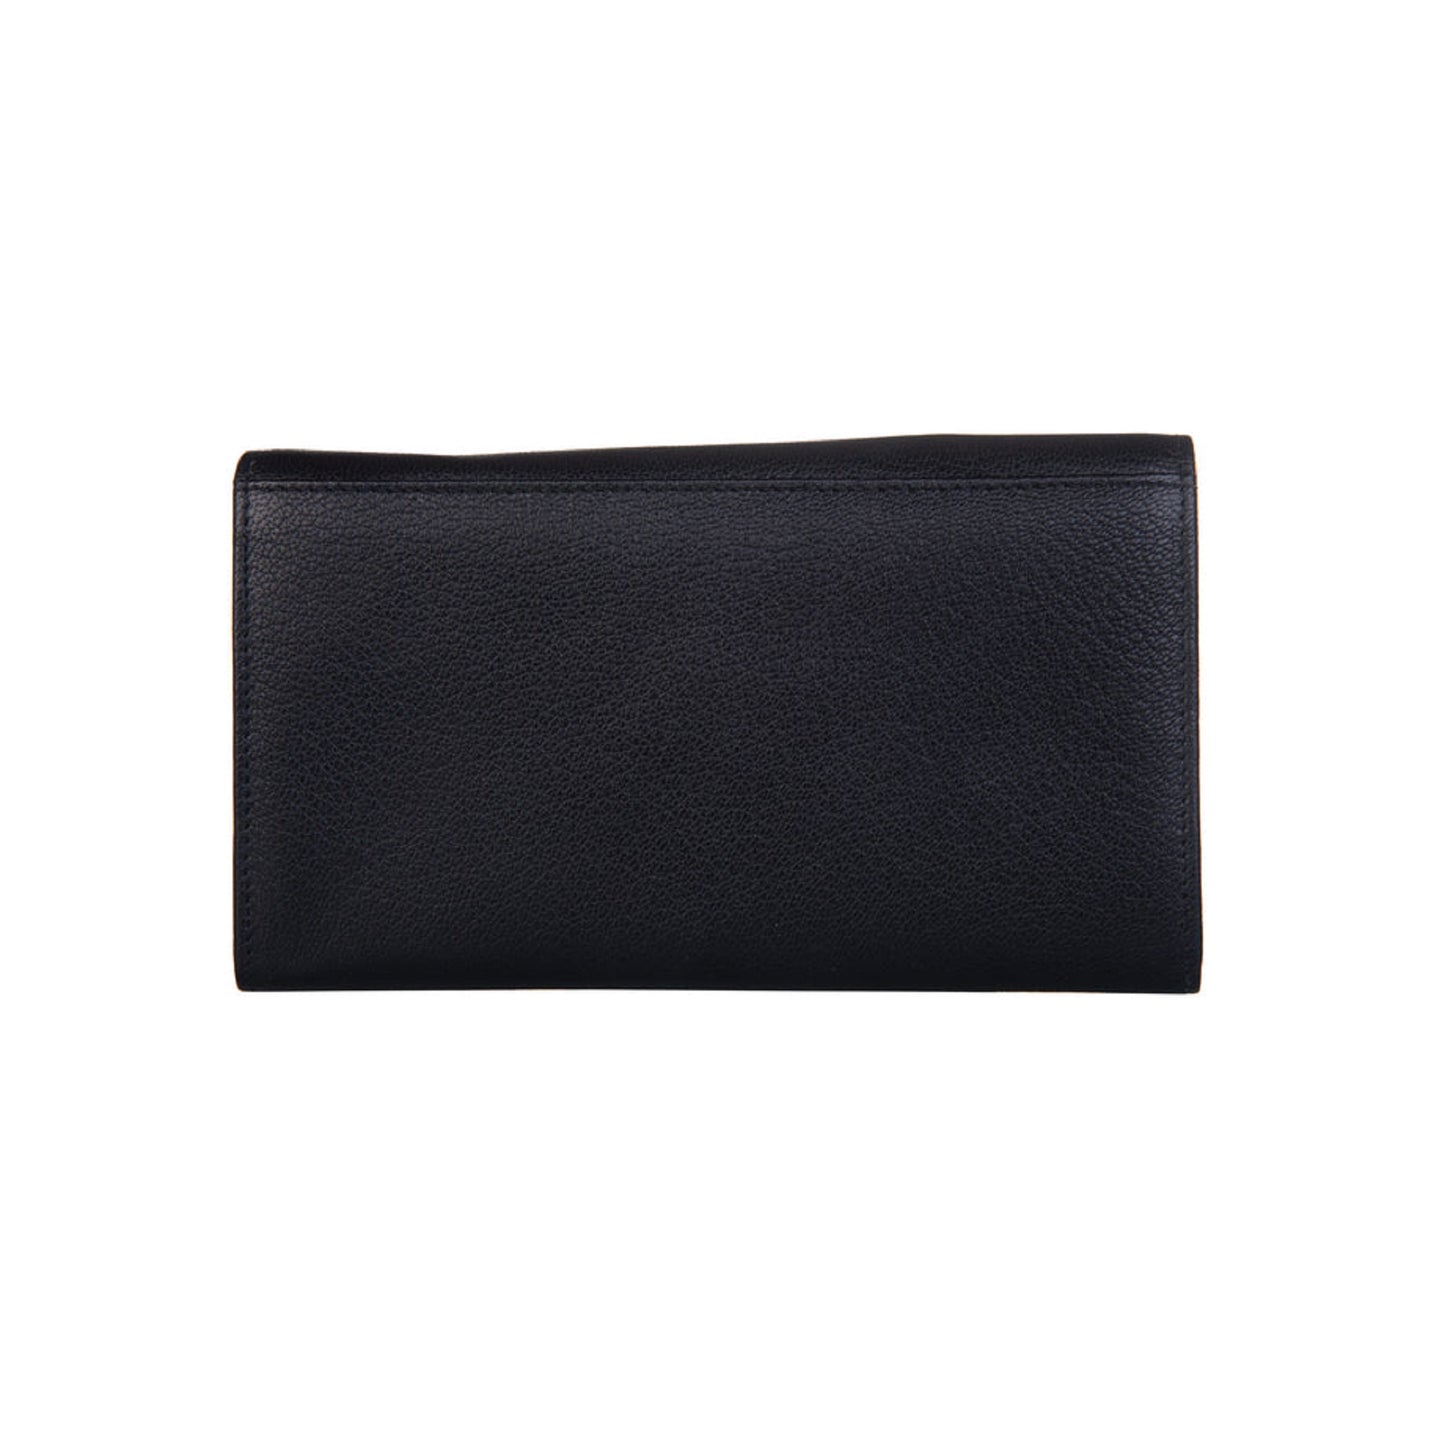 Shiloh Matinee Leather Wallet - Blue